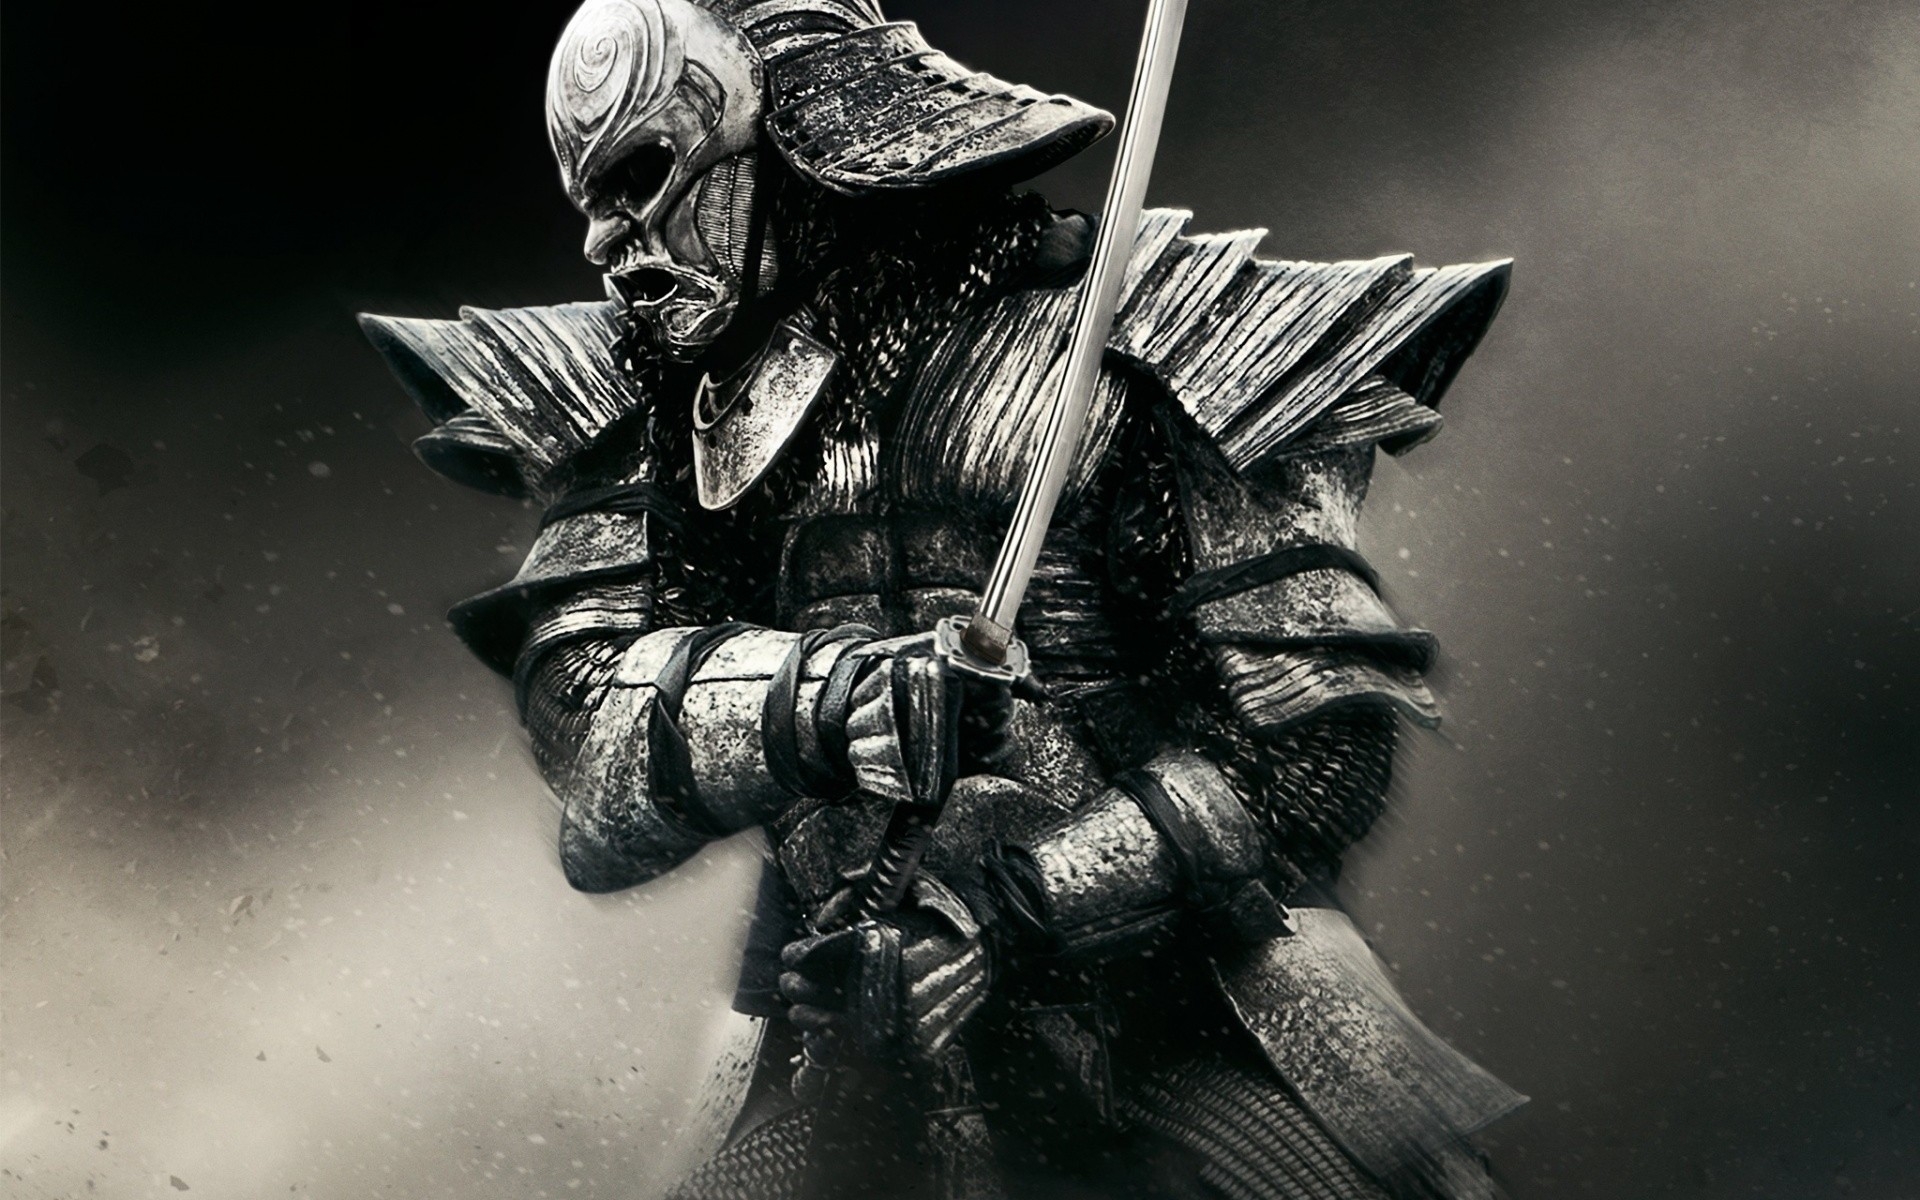 47 ronin wallpaper,black and white,illustration,photography,action figure,cg artwork